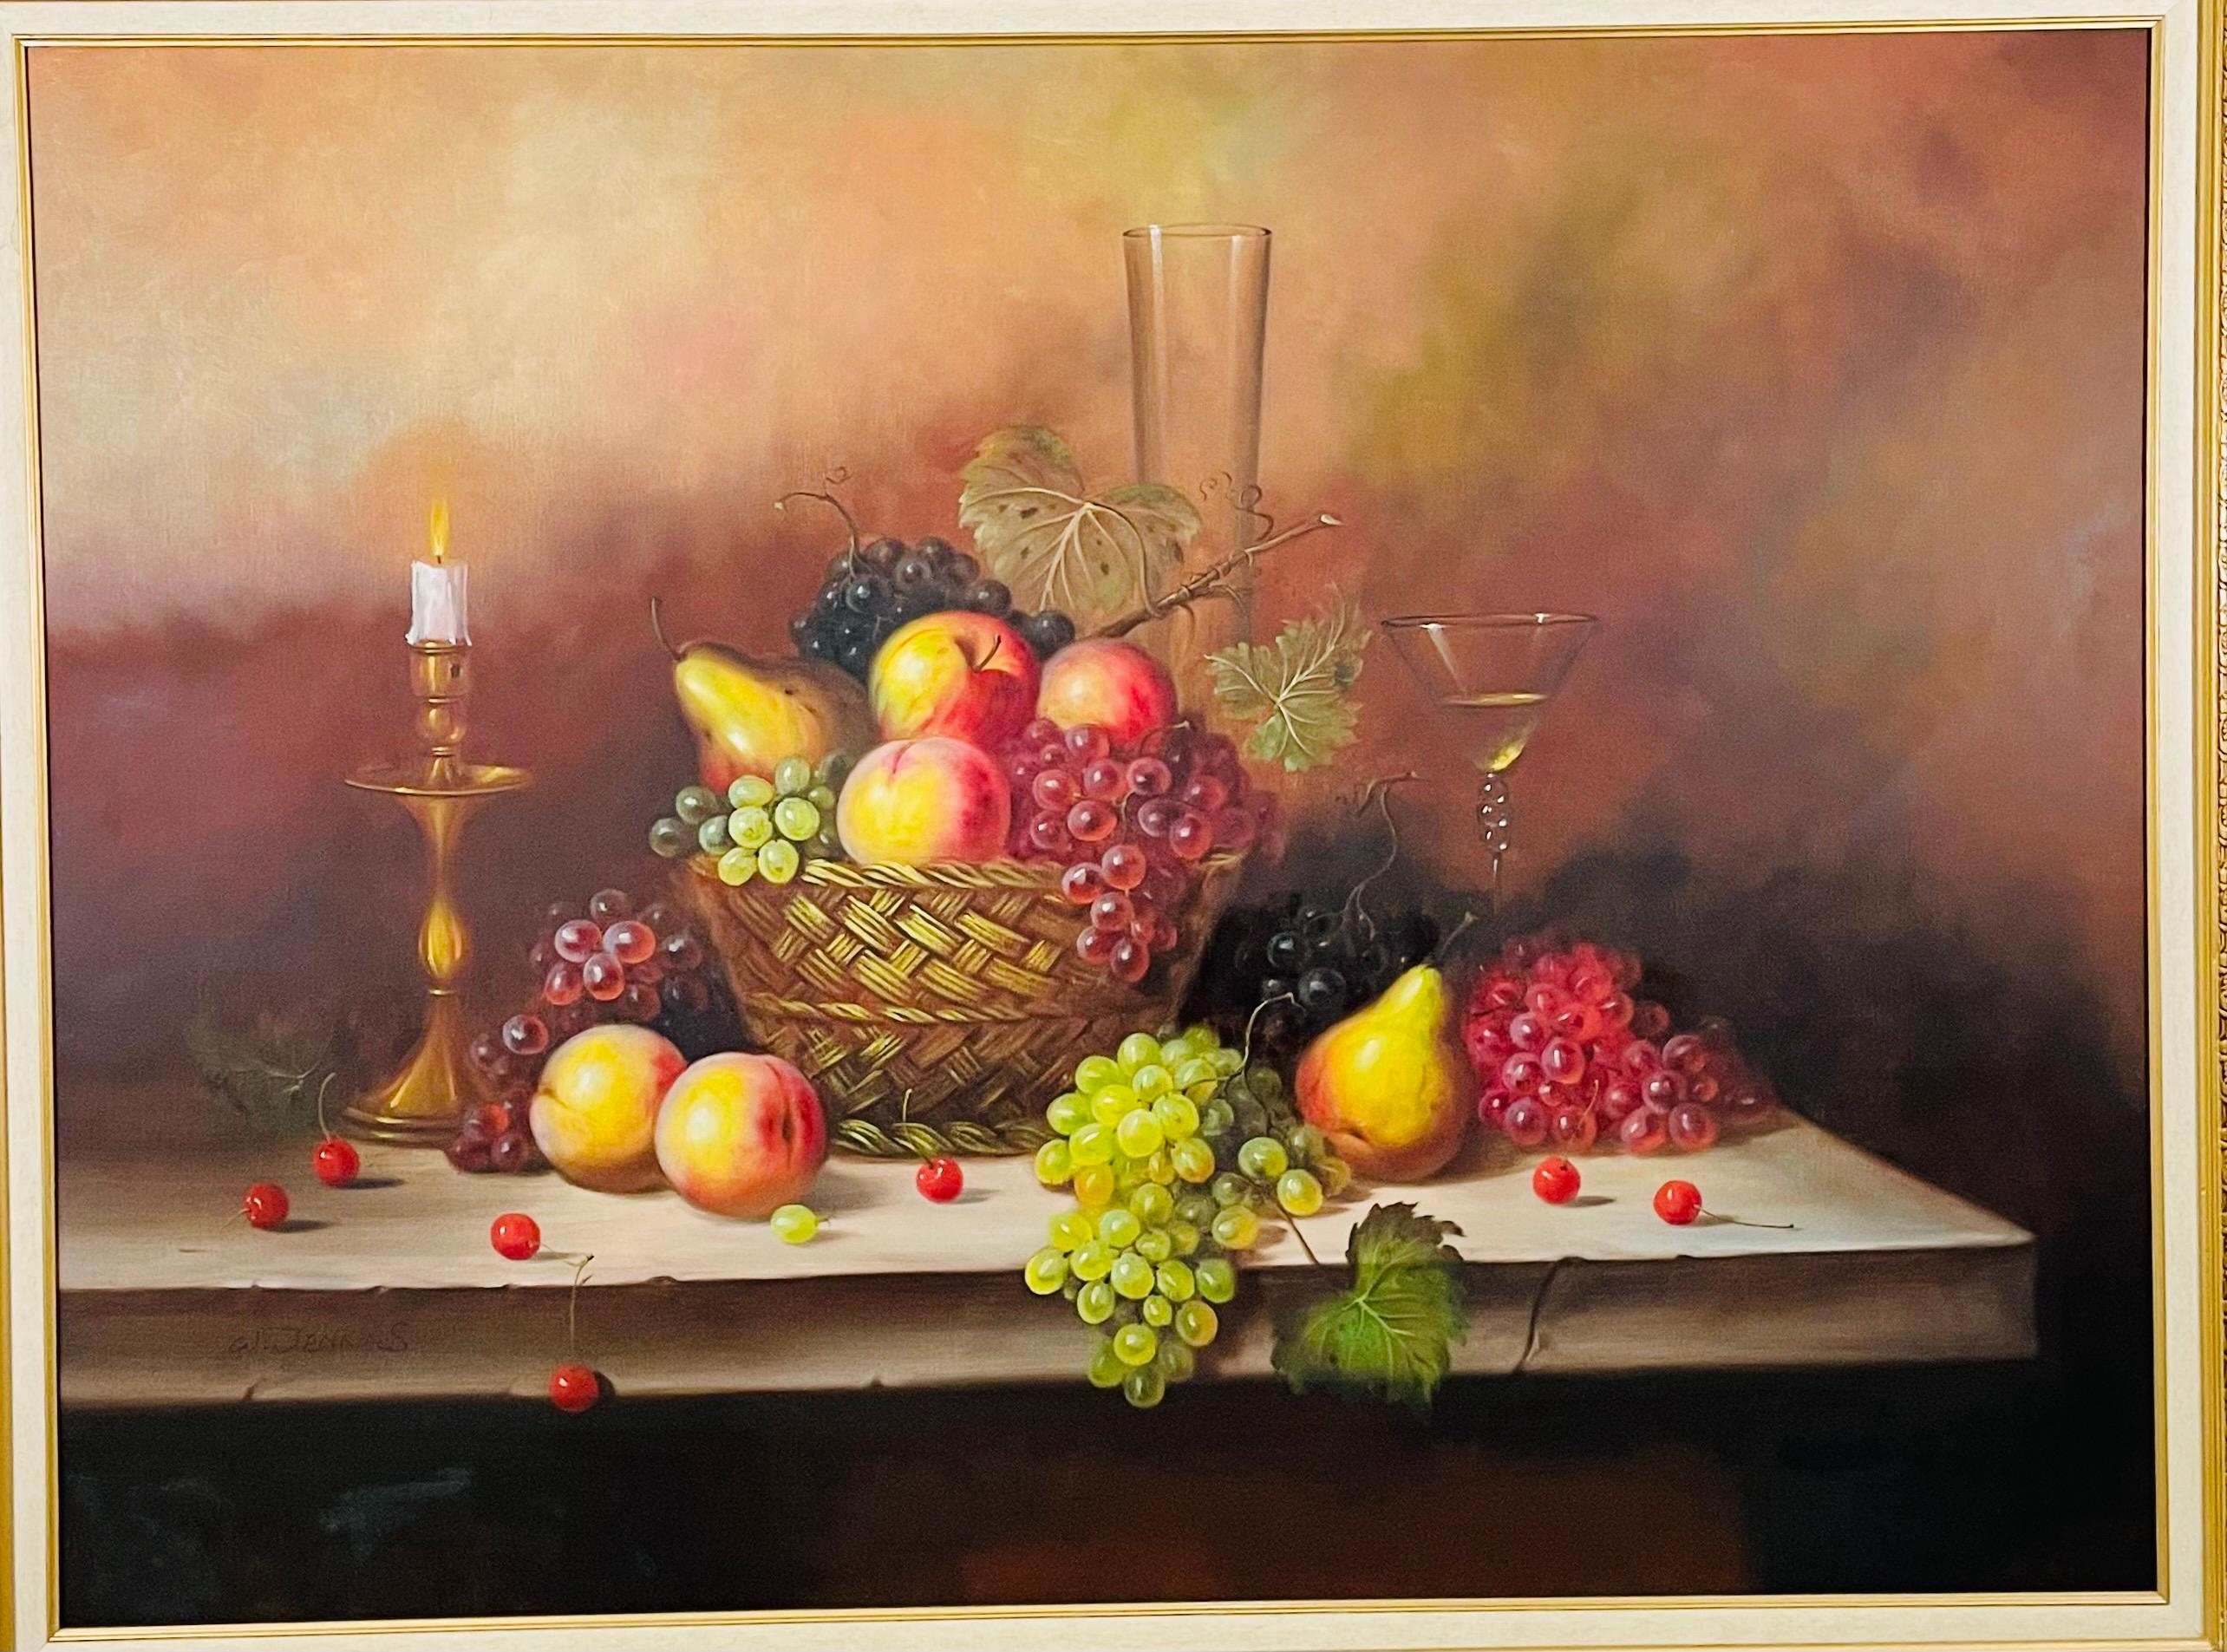 A large oil on canvas still life fruits painting by the artist W.Jenkins (20th Century - United Kingdom). The painting depicts a basket and a table full of grapes and apples next to a candle and a glass of white wine. The painting is lightly signed